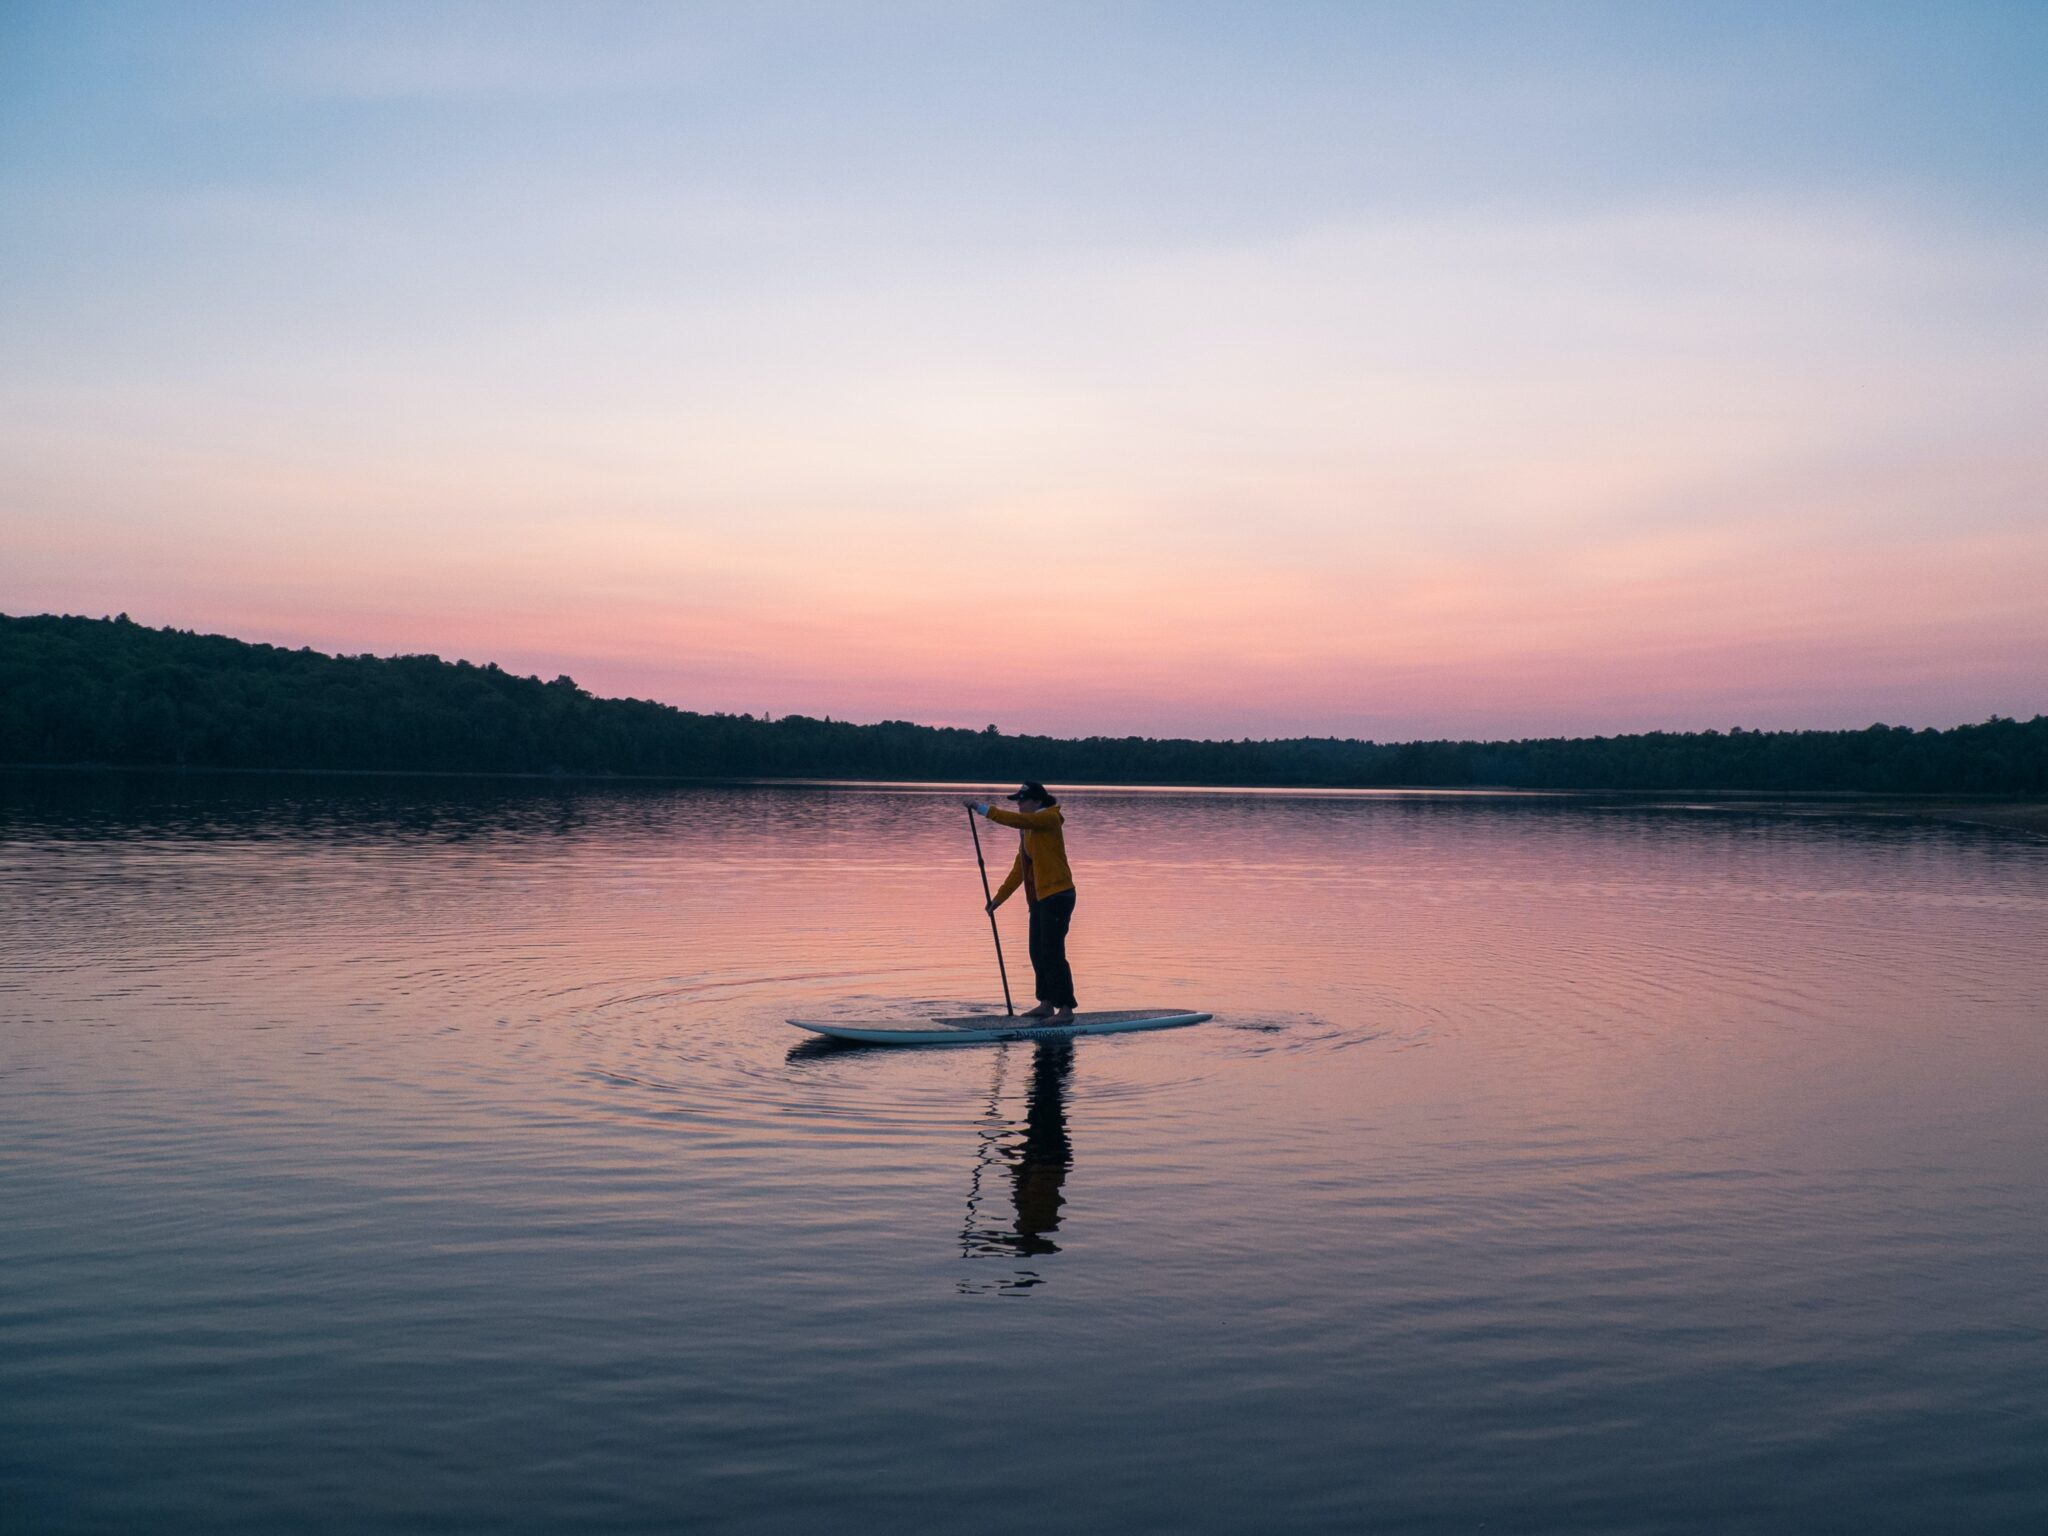 A woman uses a paddleboard on a lake at sunset. She is wearing a jacket and heavy pants.